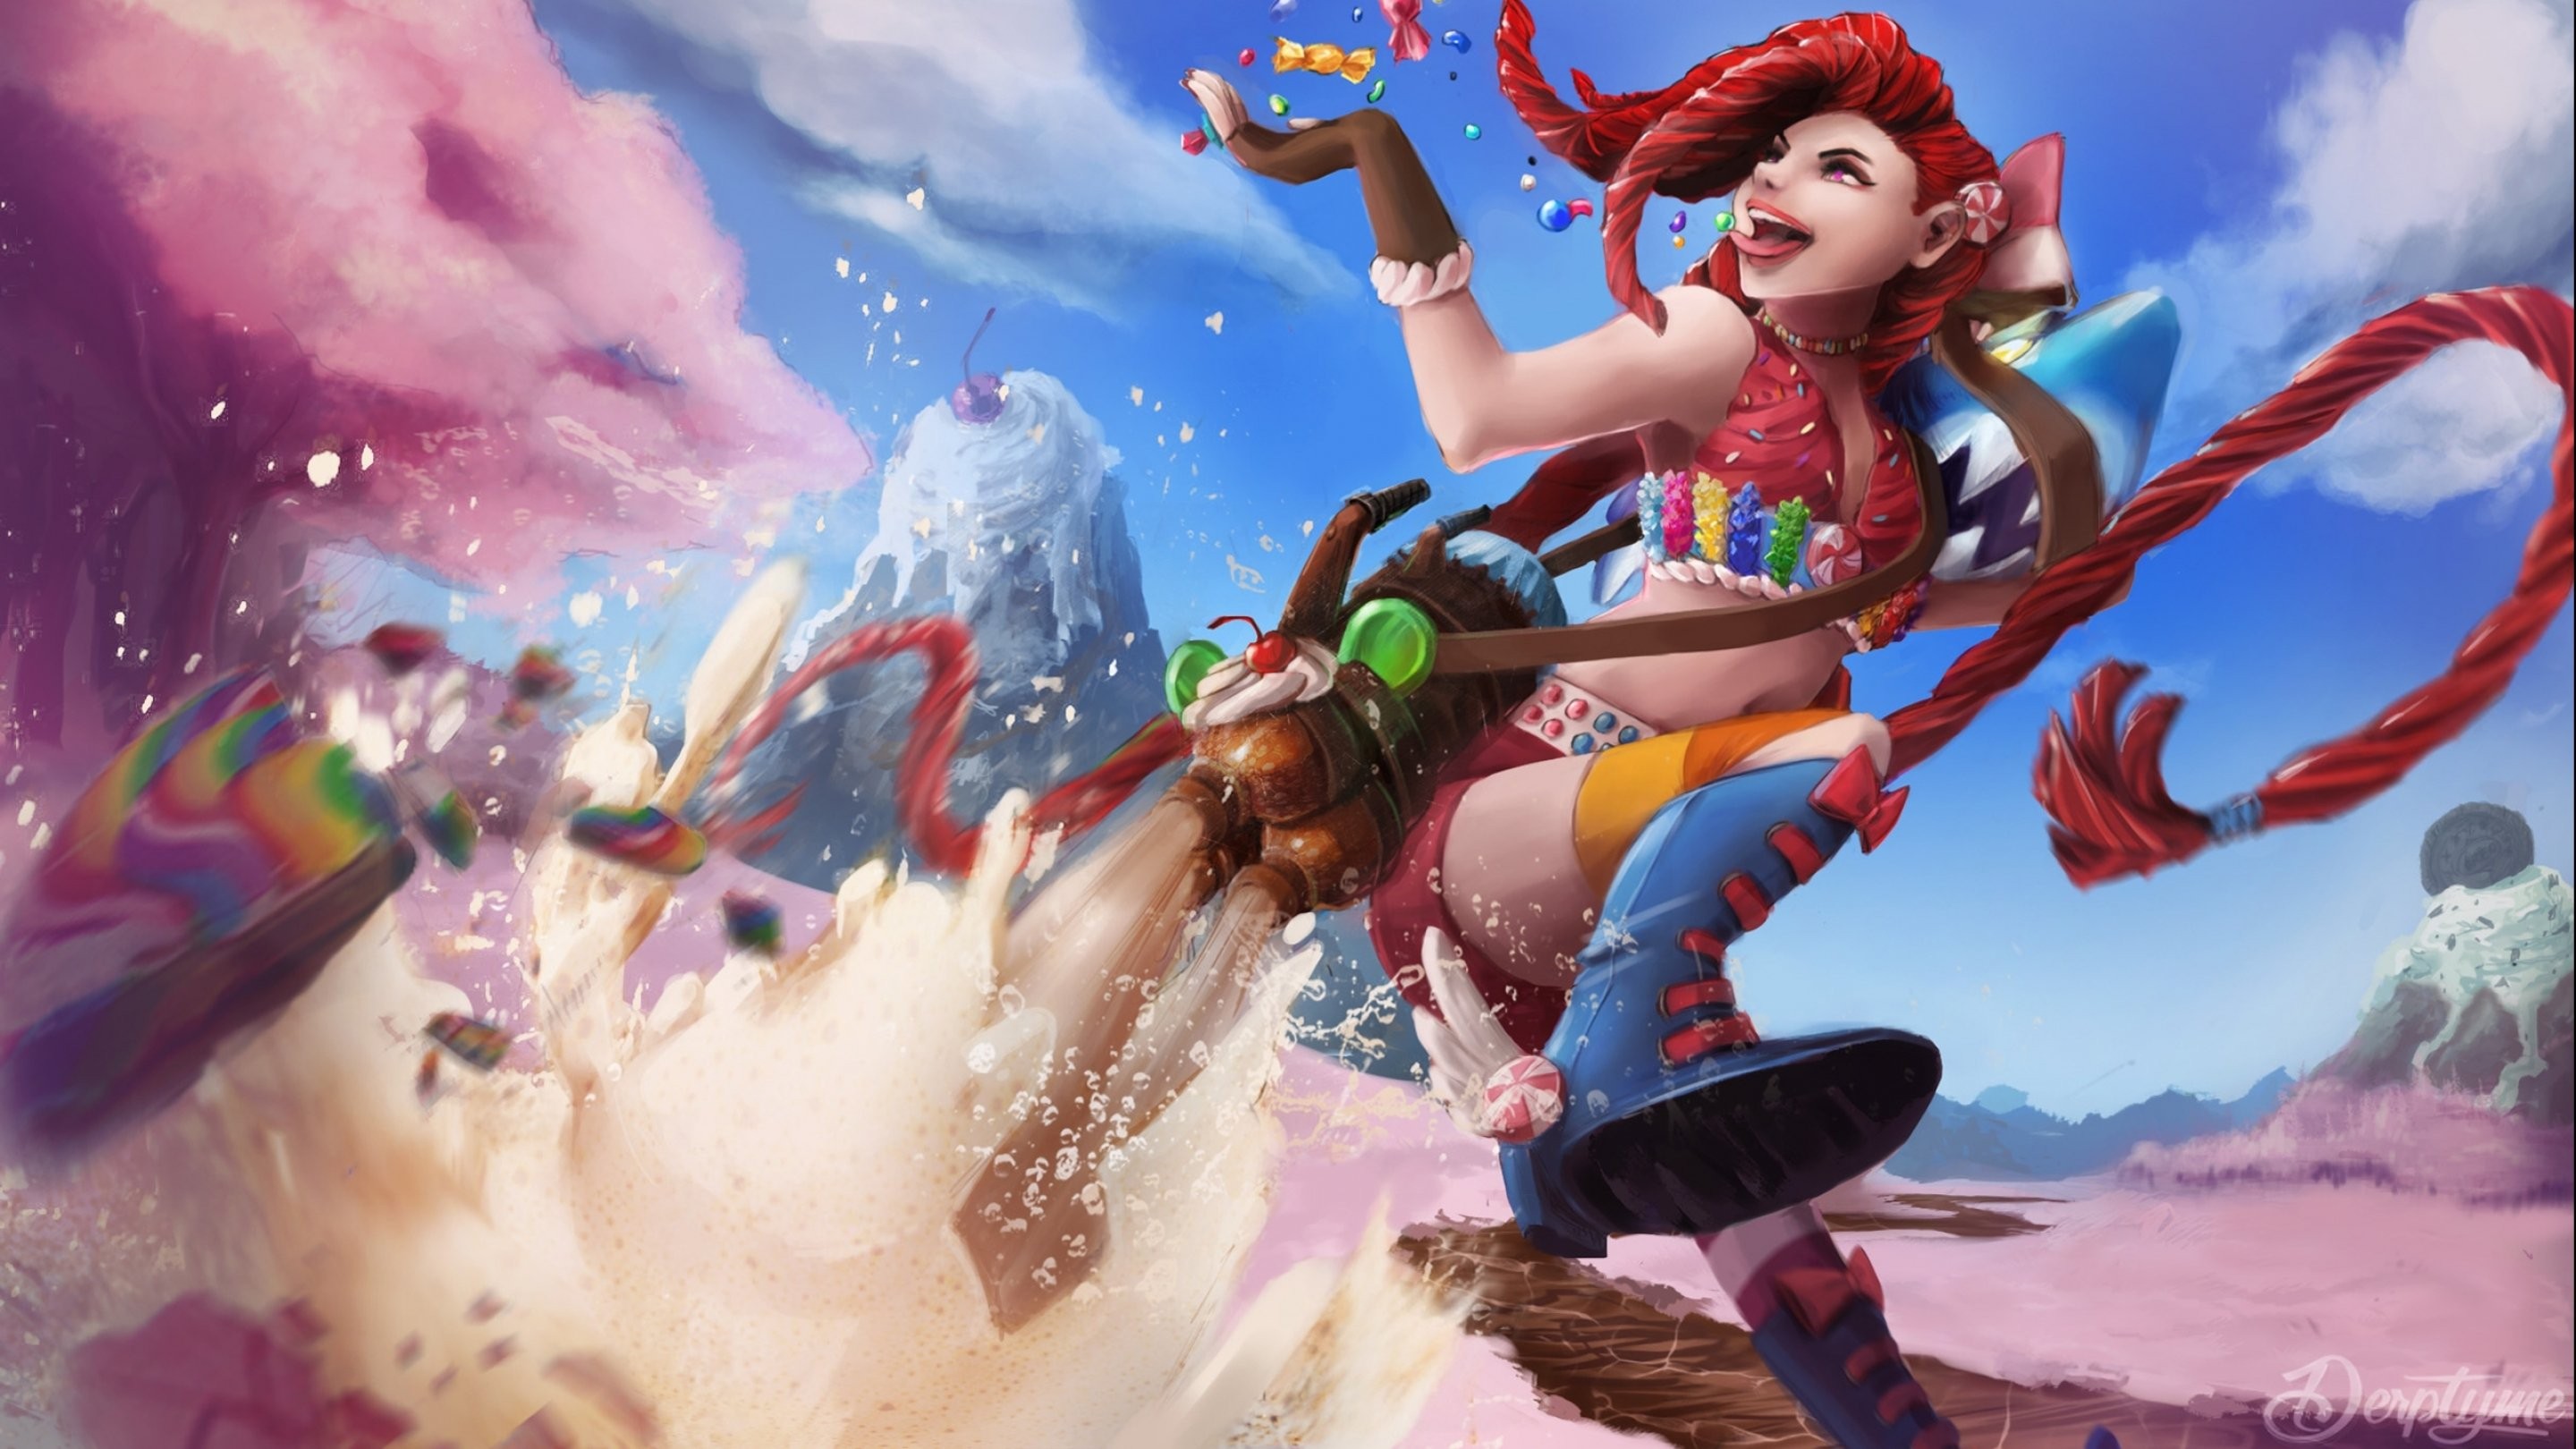 General 2880x1620 fantasy girl redhead tongue out PC gaming Jinx (League of Legends) League of Legends tongues long hair video game art video game girls video game characters